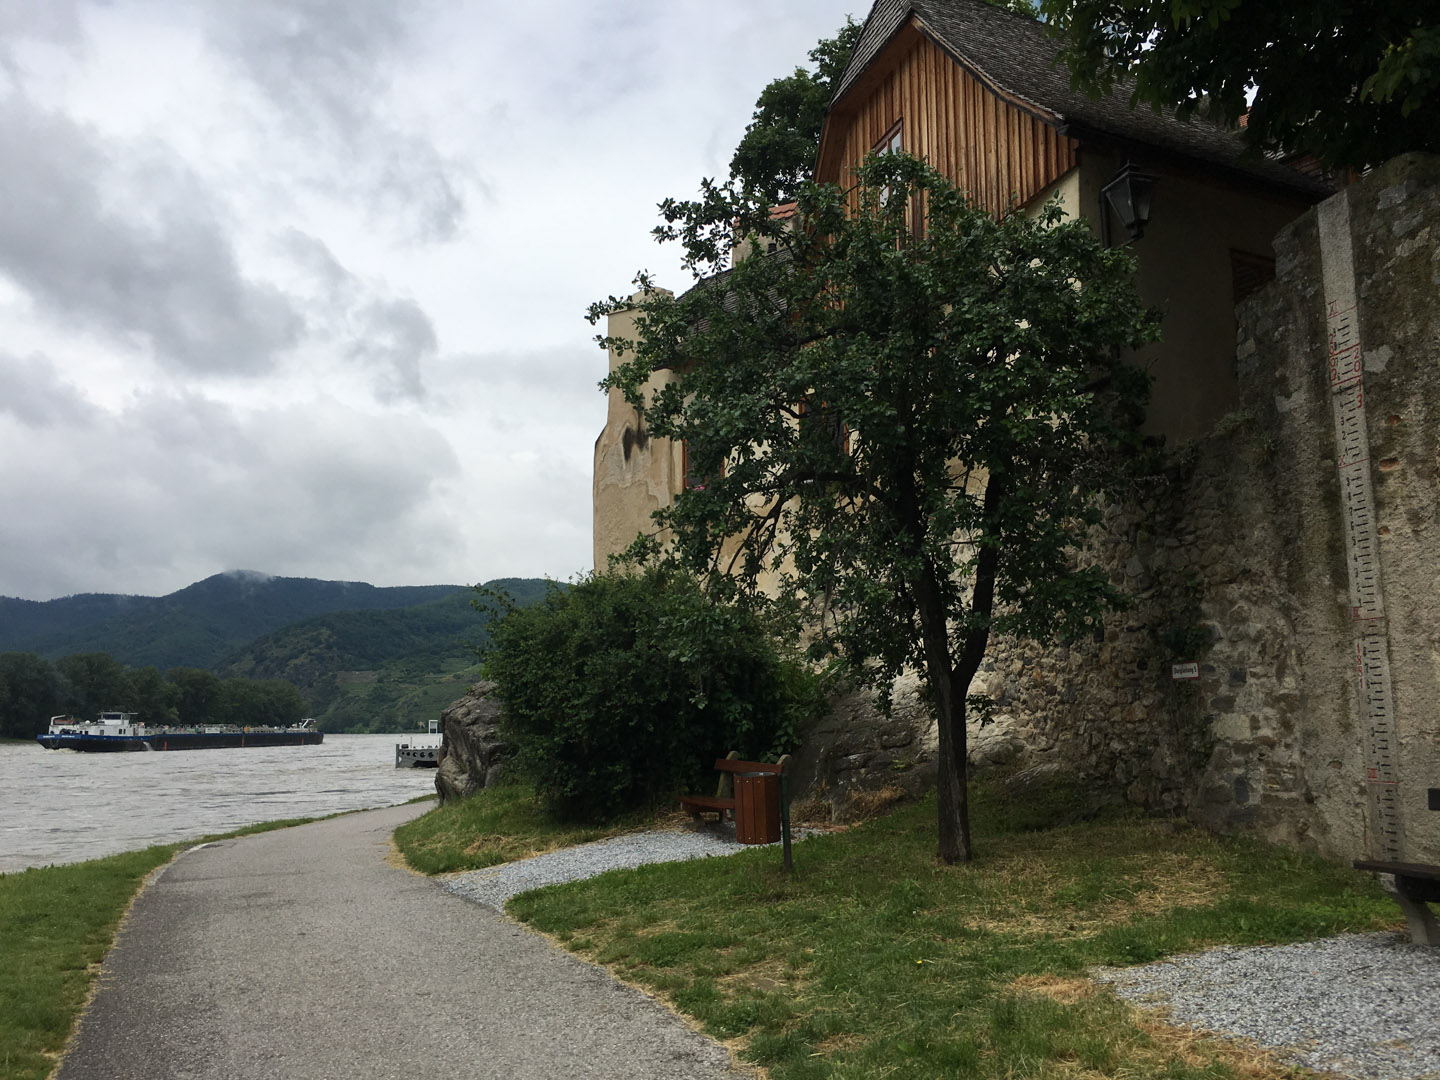 Durnstein on the banks of the Rhine